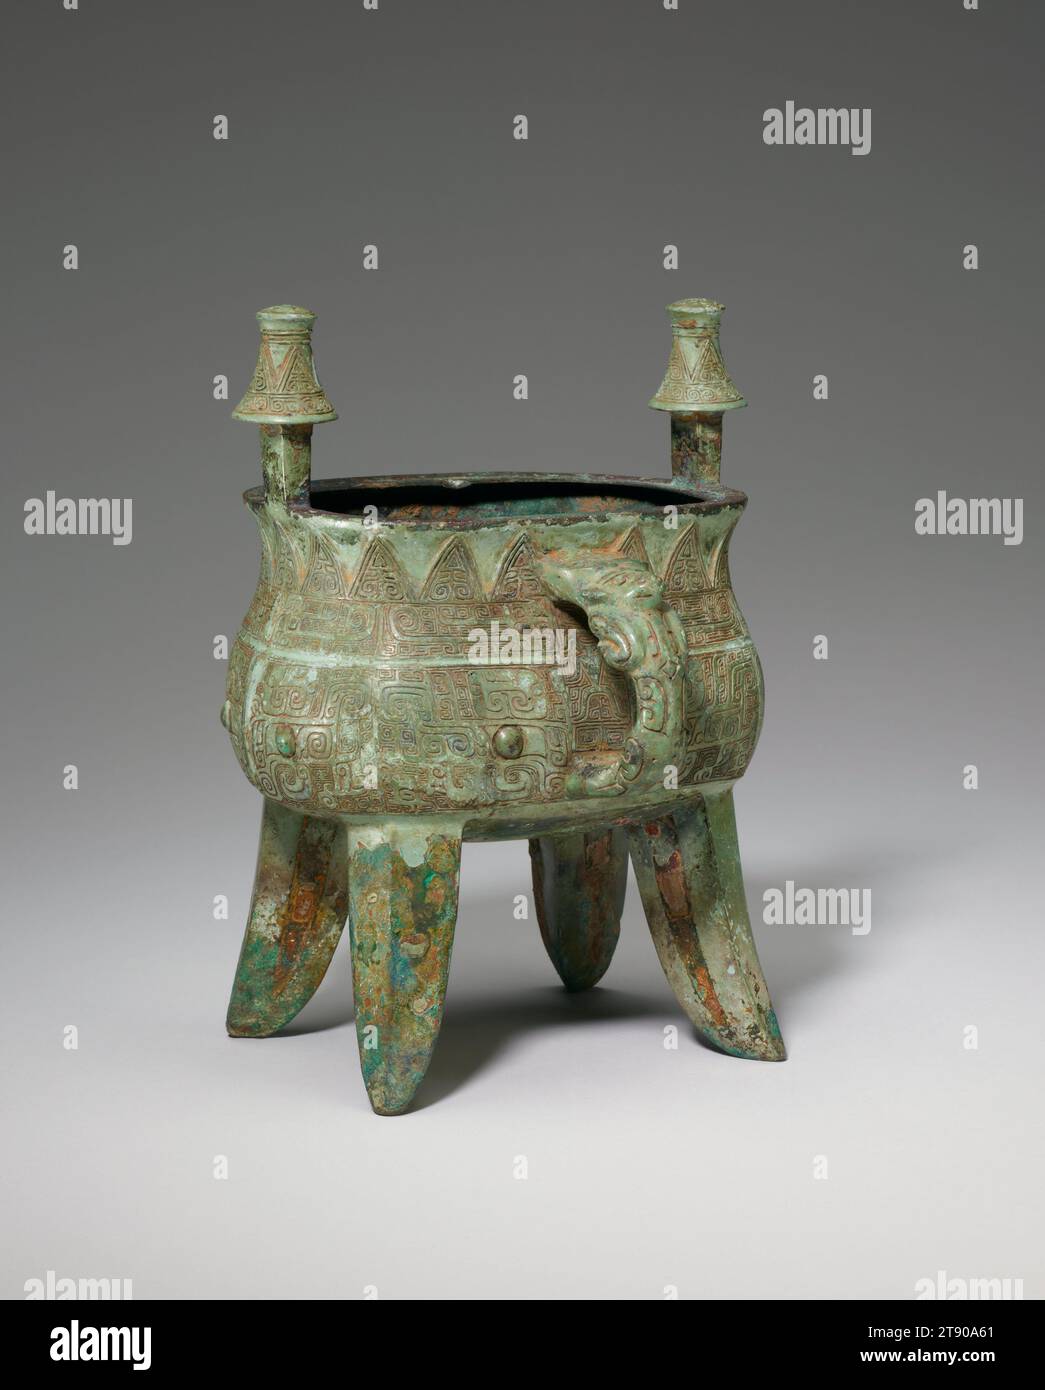 Jia wine vessel, 12th century BCE, 8 3/4 × 6 9/16 × 6 5/16 in., 4 lb. (22.23 × 16.67 × 16.03 cm, 1.8 kg)5 5/8 × 4 1/8 in. (14.29 × 10.48 cm) (object part, mouth), Bronze, China, 12th century BCE, The profile of this jia wine vessel’s body is S-shaped, with the inward curvature placed close to the rim of the vessel. Dragonized taotie and rising blades with stylized cicadas decorate the neck belt. The body taotie, on a ground of squared spirals, displays unusual features: horns with alternating T-shaped and straight scores usually associated with flanges, and a hybrid forehead shield Stock Photo